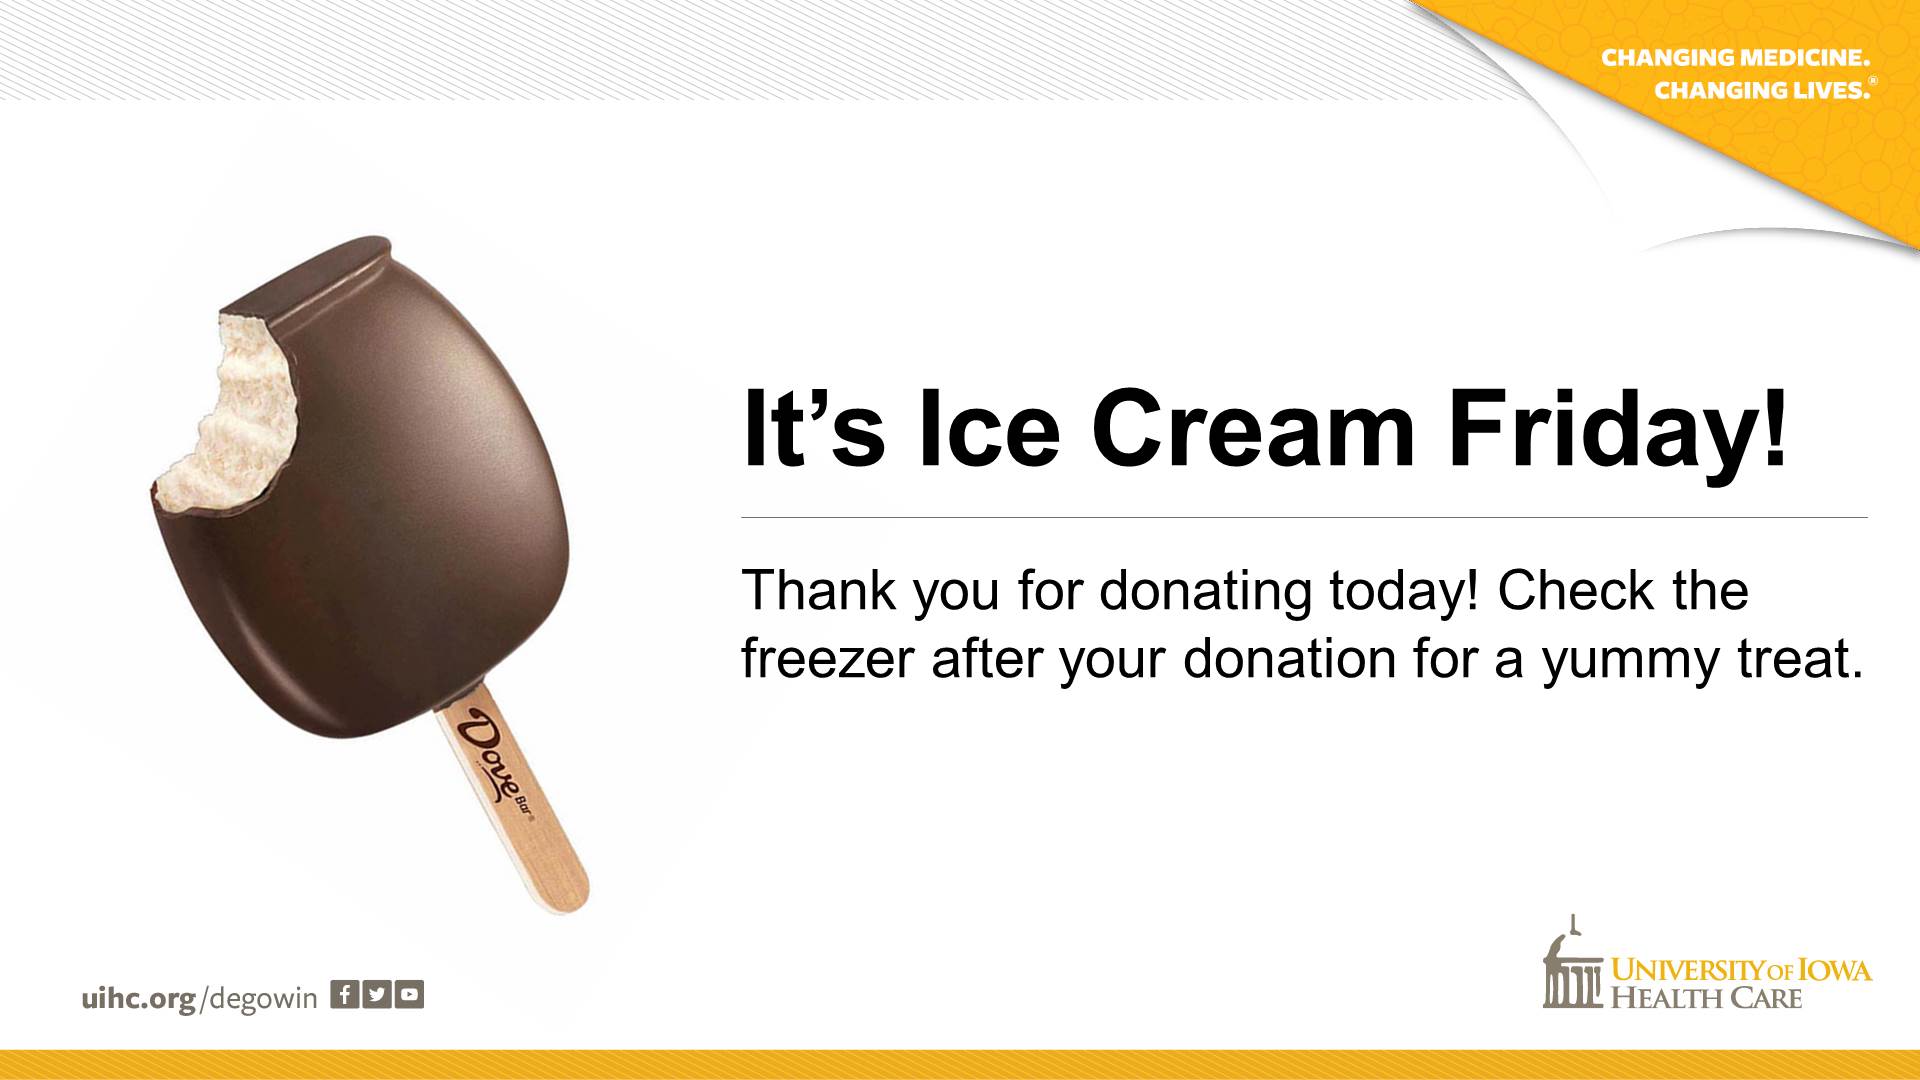 It's an ice cream friday. Check the freezer after your donation for a yummy treat.